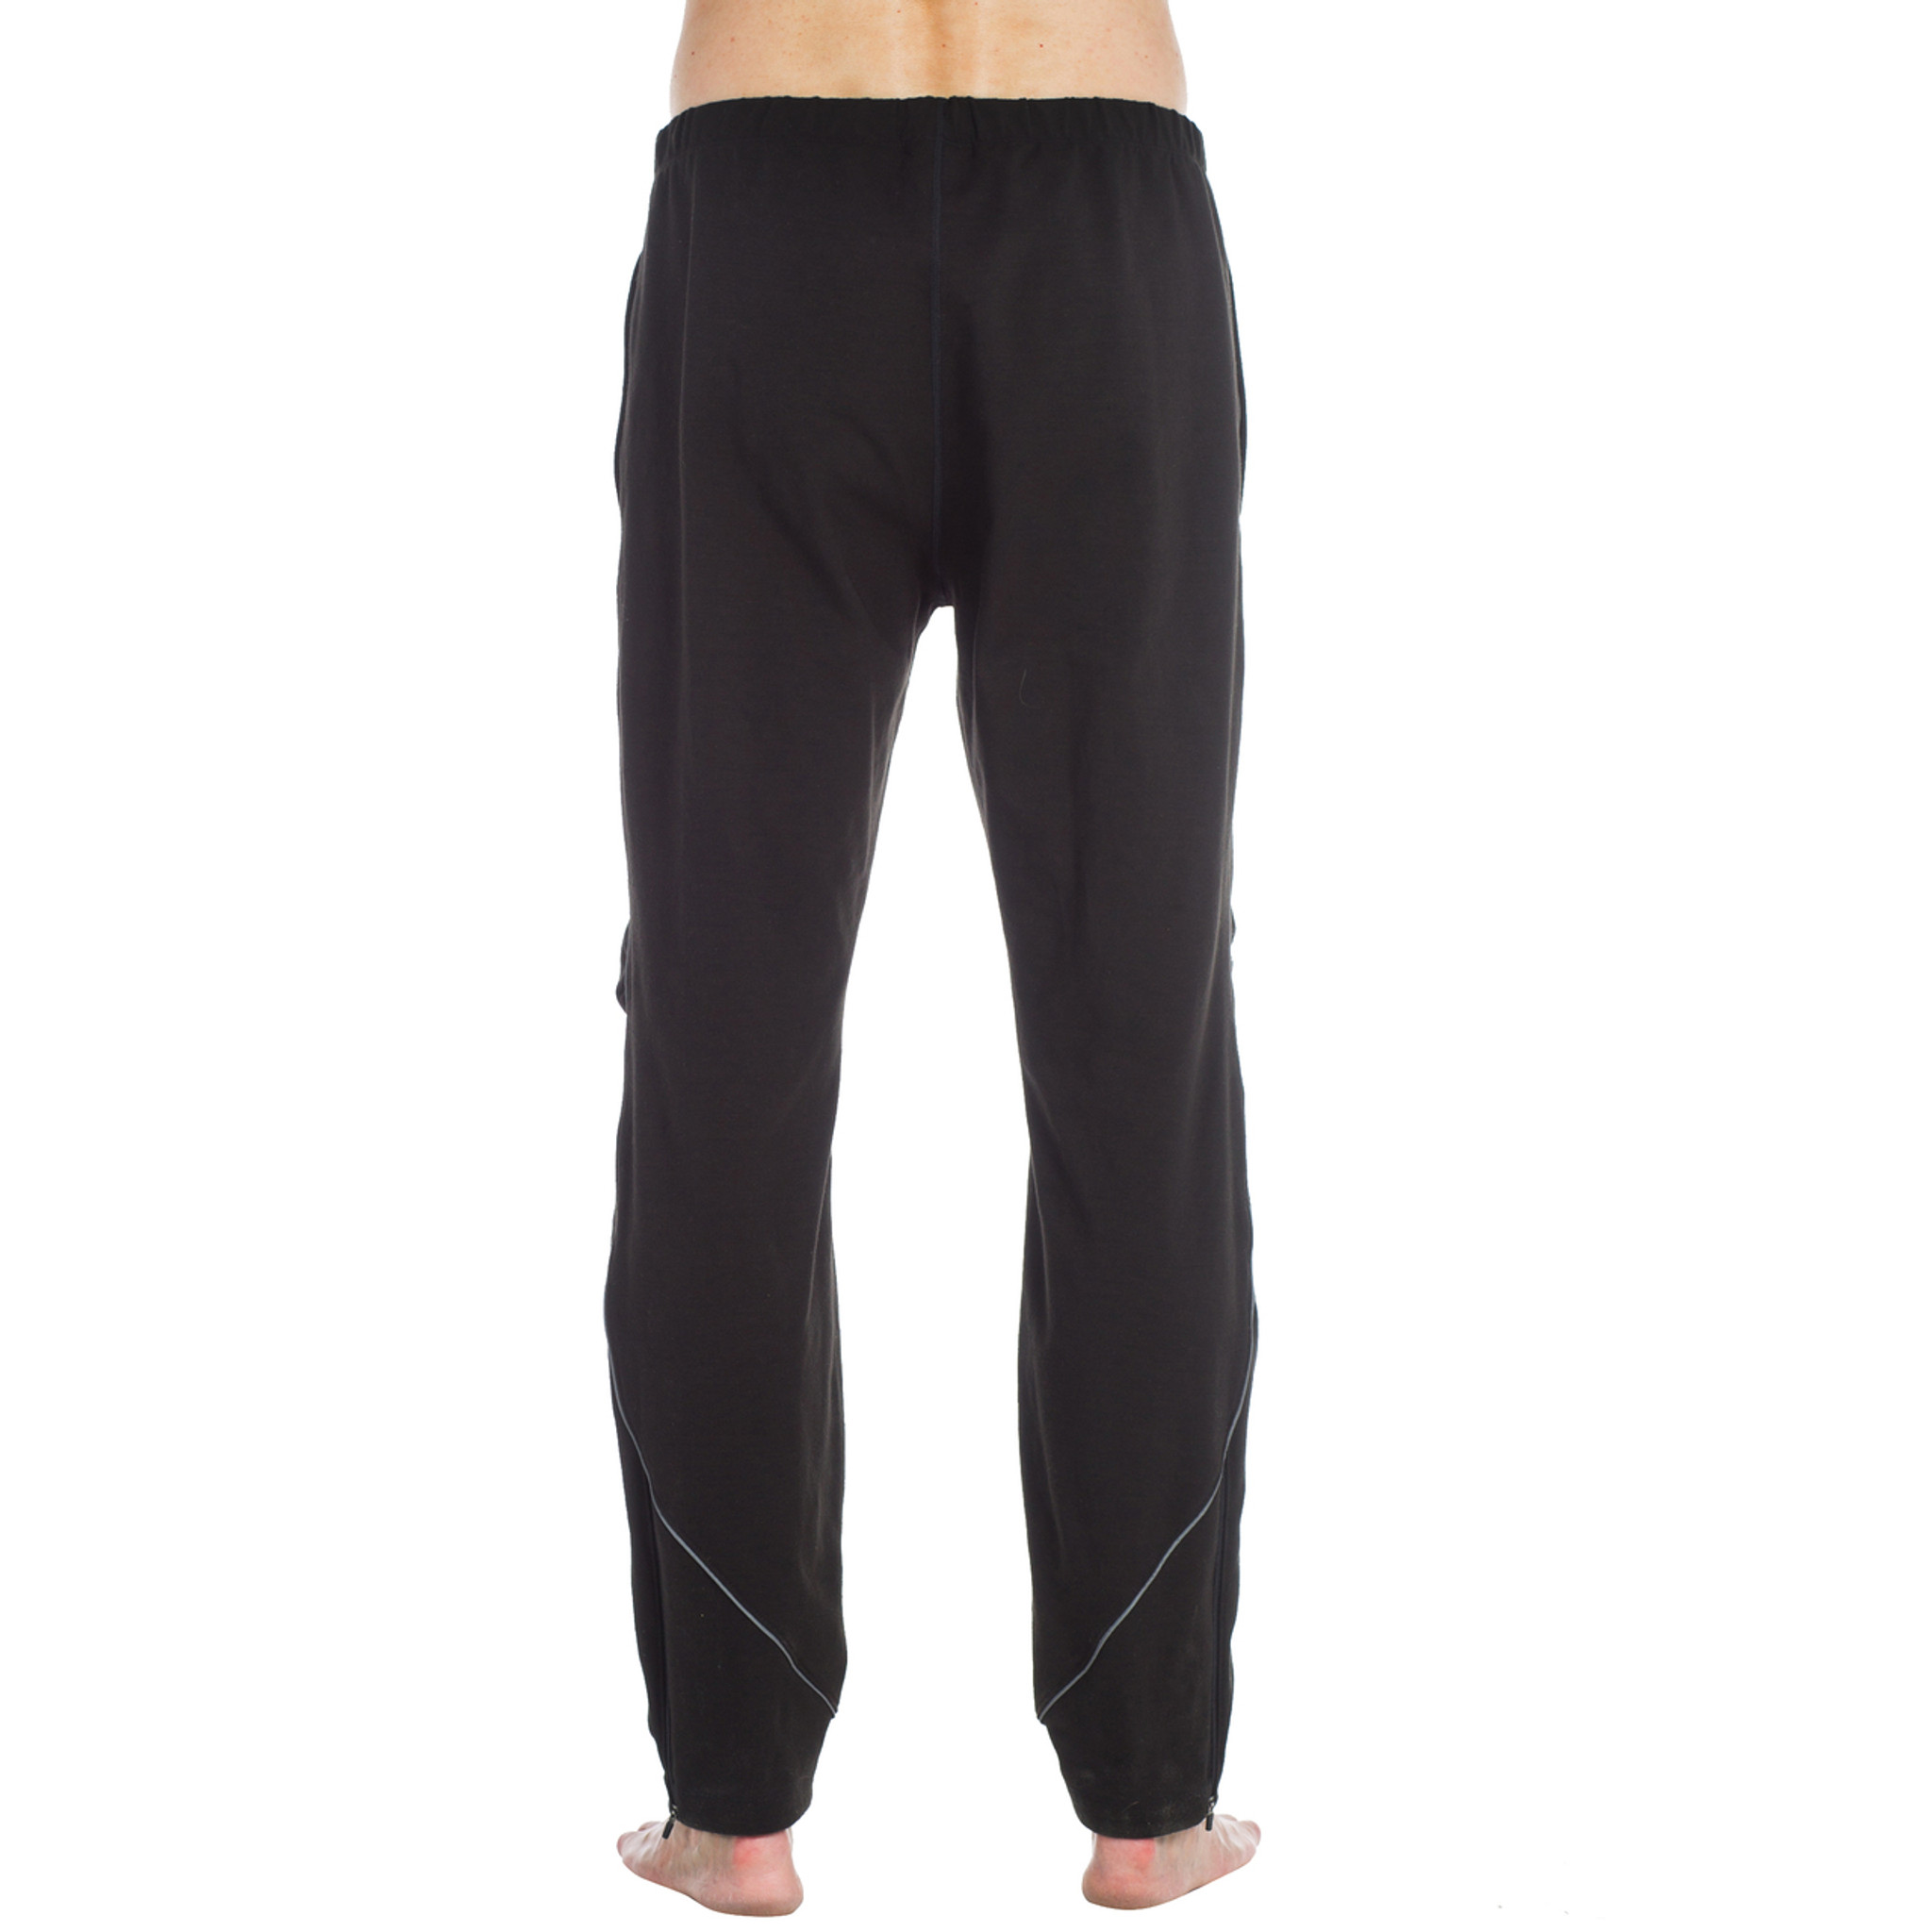 Men's Cold Weather Pant for Running, Skiing, Cycling